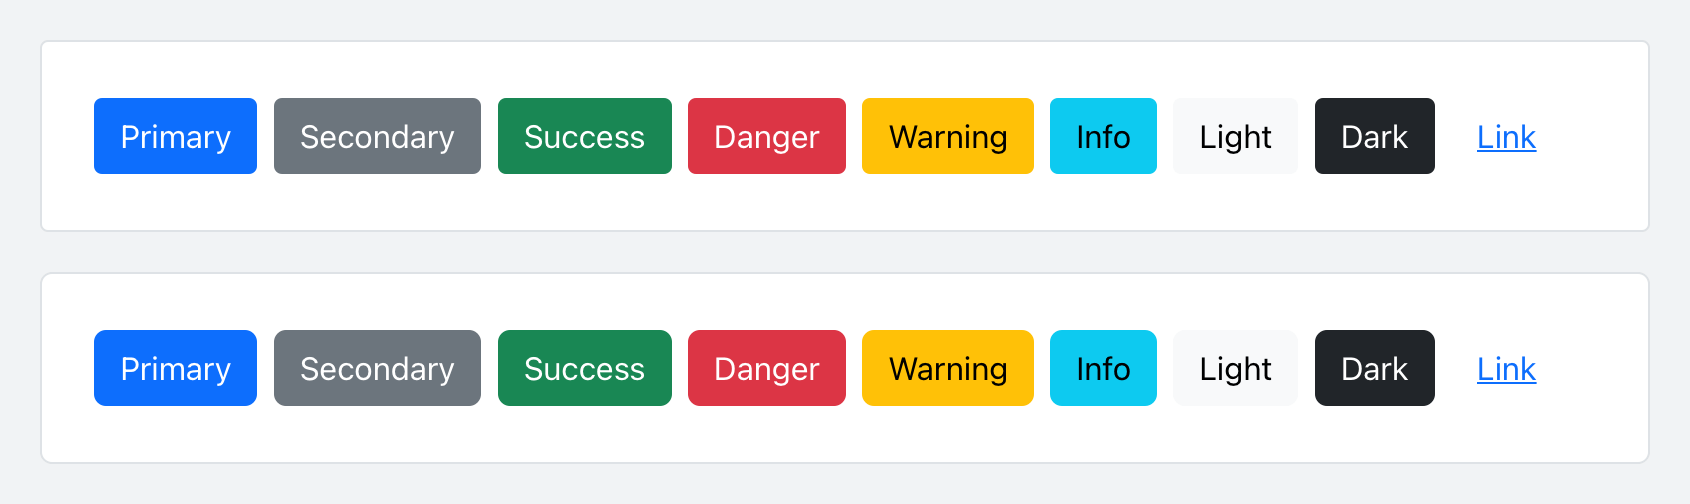 20+ cool CSS Animated Buttons | Qirolab